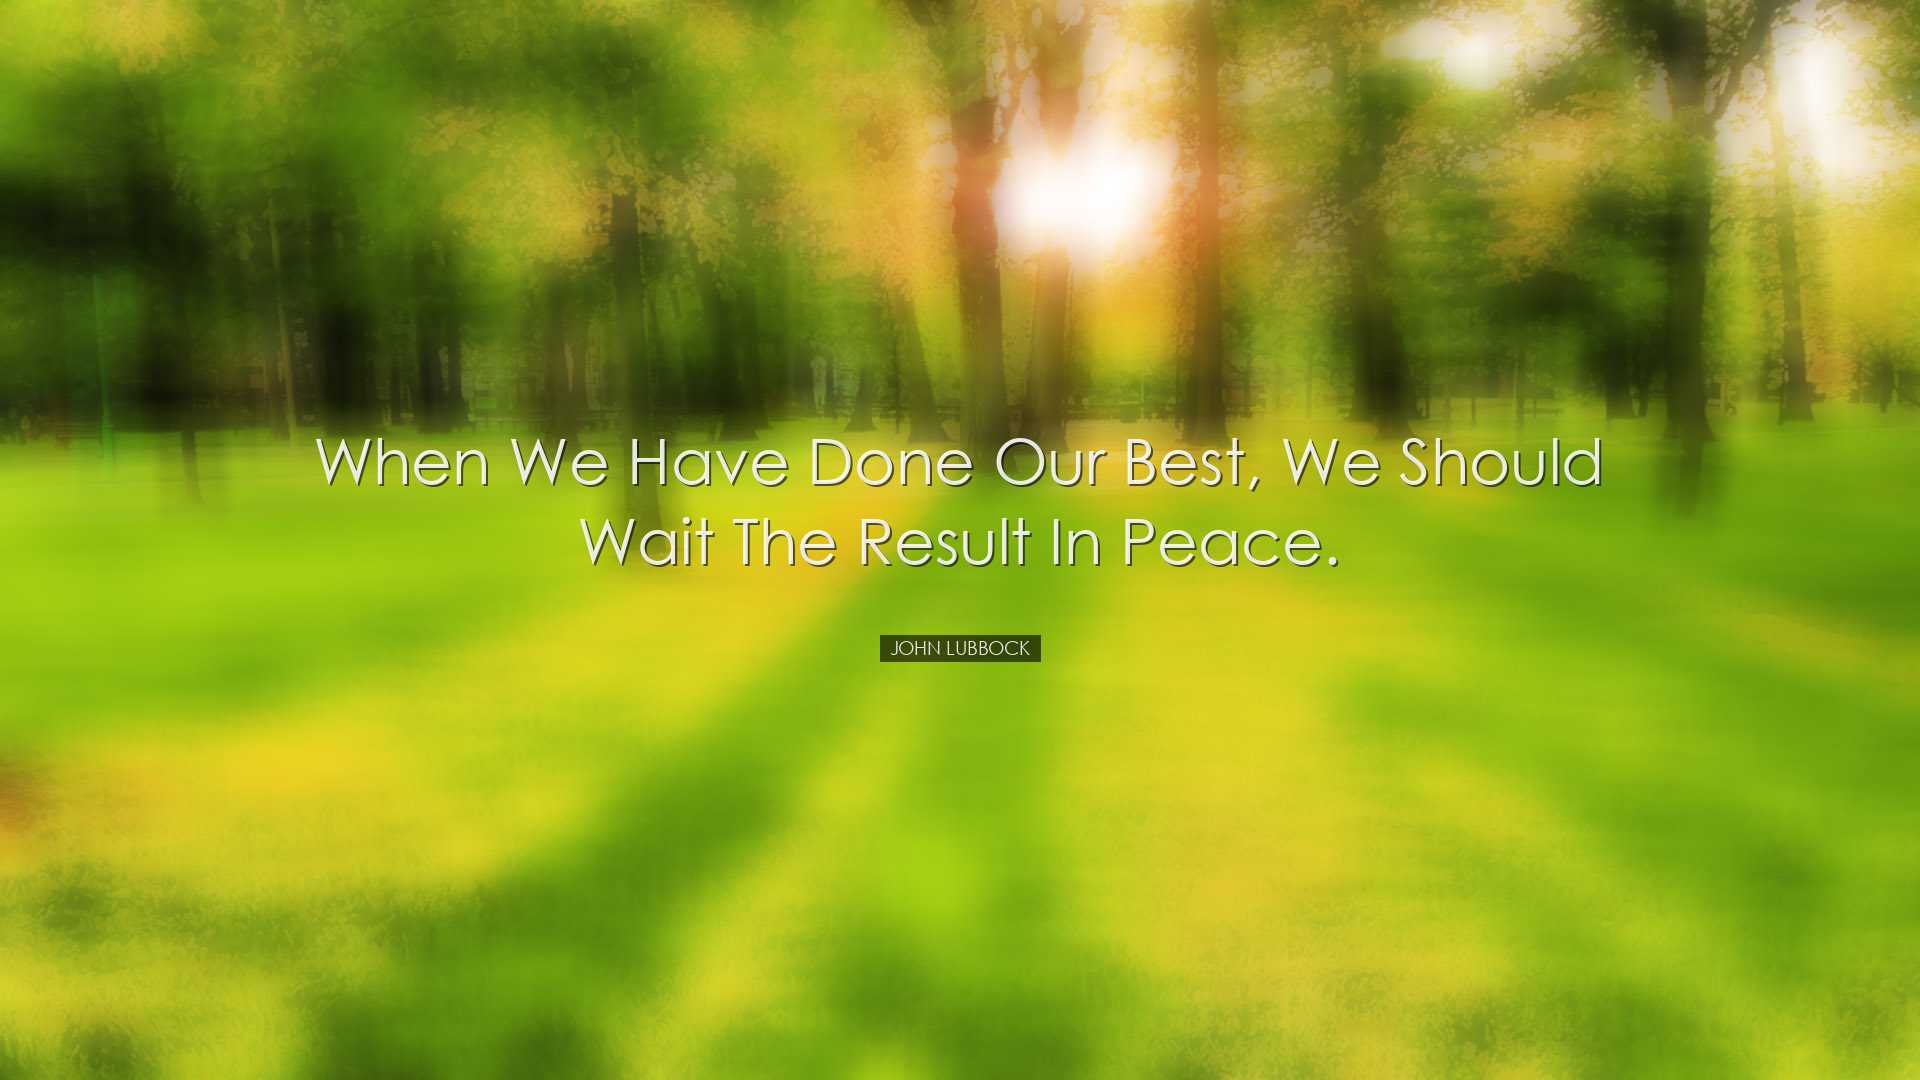 When we have done our best, we should wait the result in peace. -